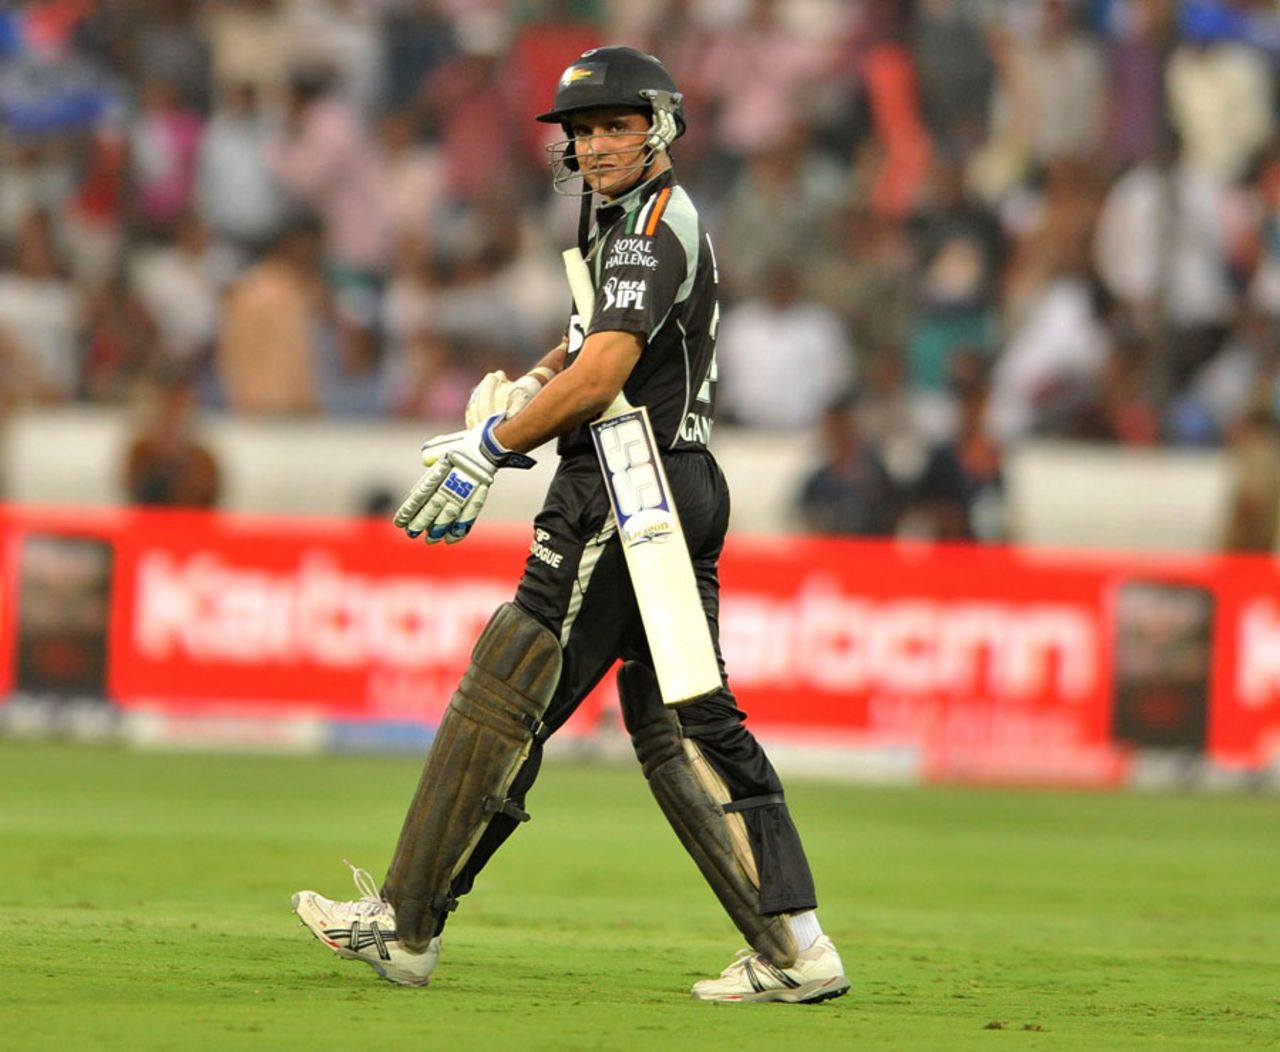 Sourav Ganguly walks out for his first hit in IPL 2011, Deccan Chargers v Pune Warriors, IPL 2011, Hyderabad, May 10, 2011